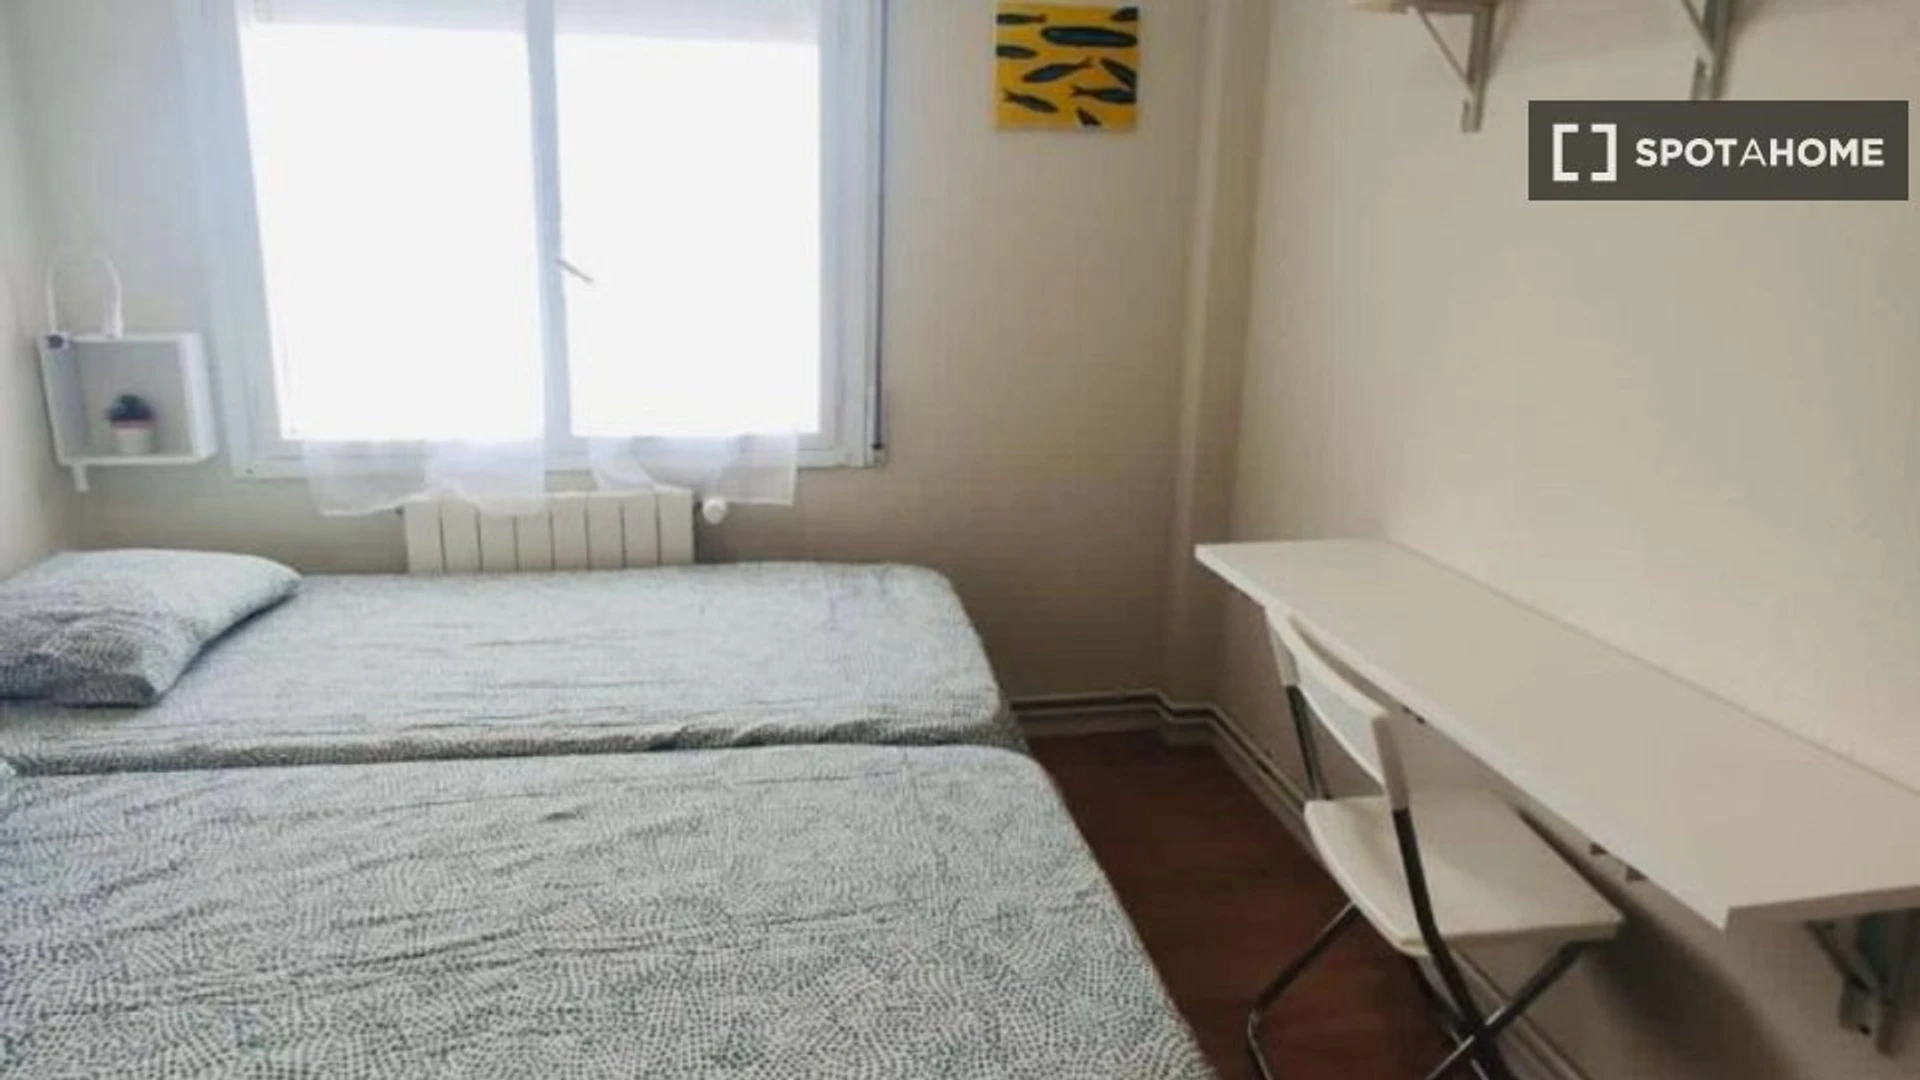 Renting rooms by the month in Santander